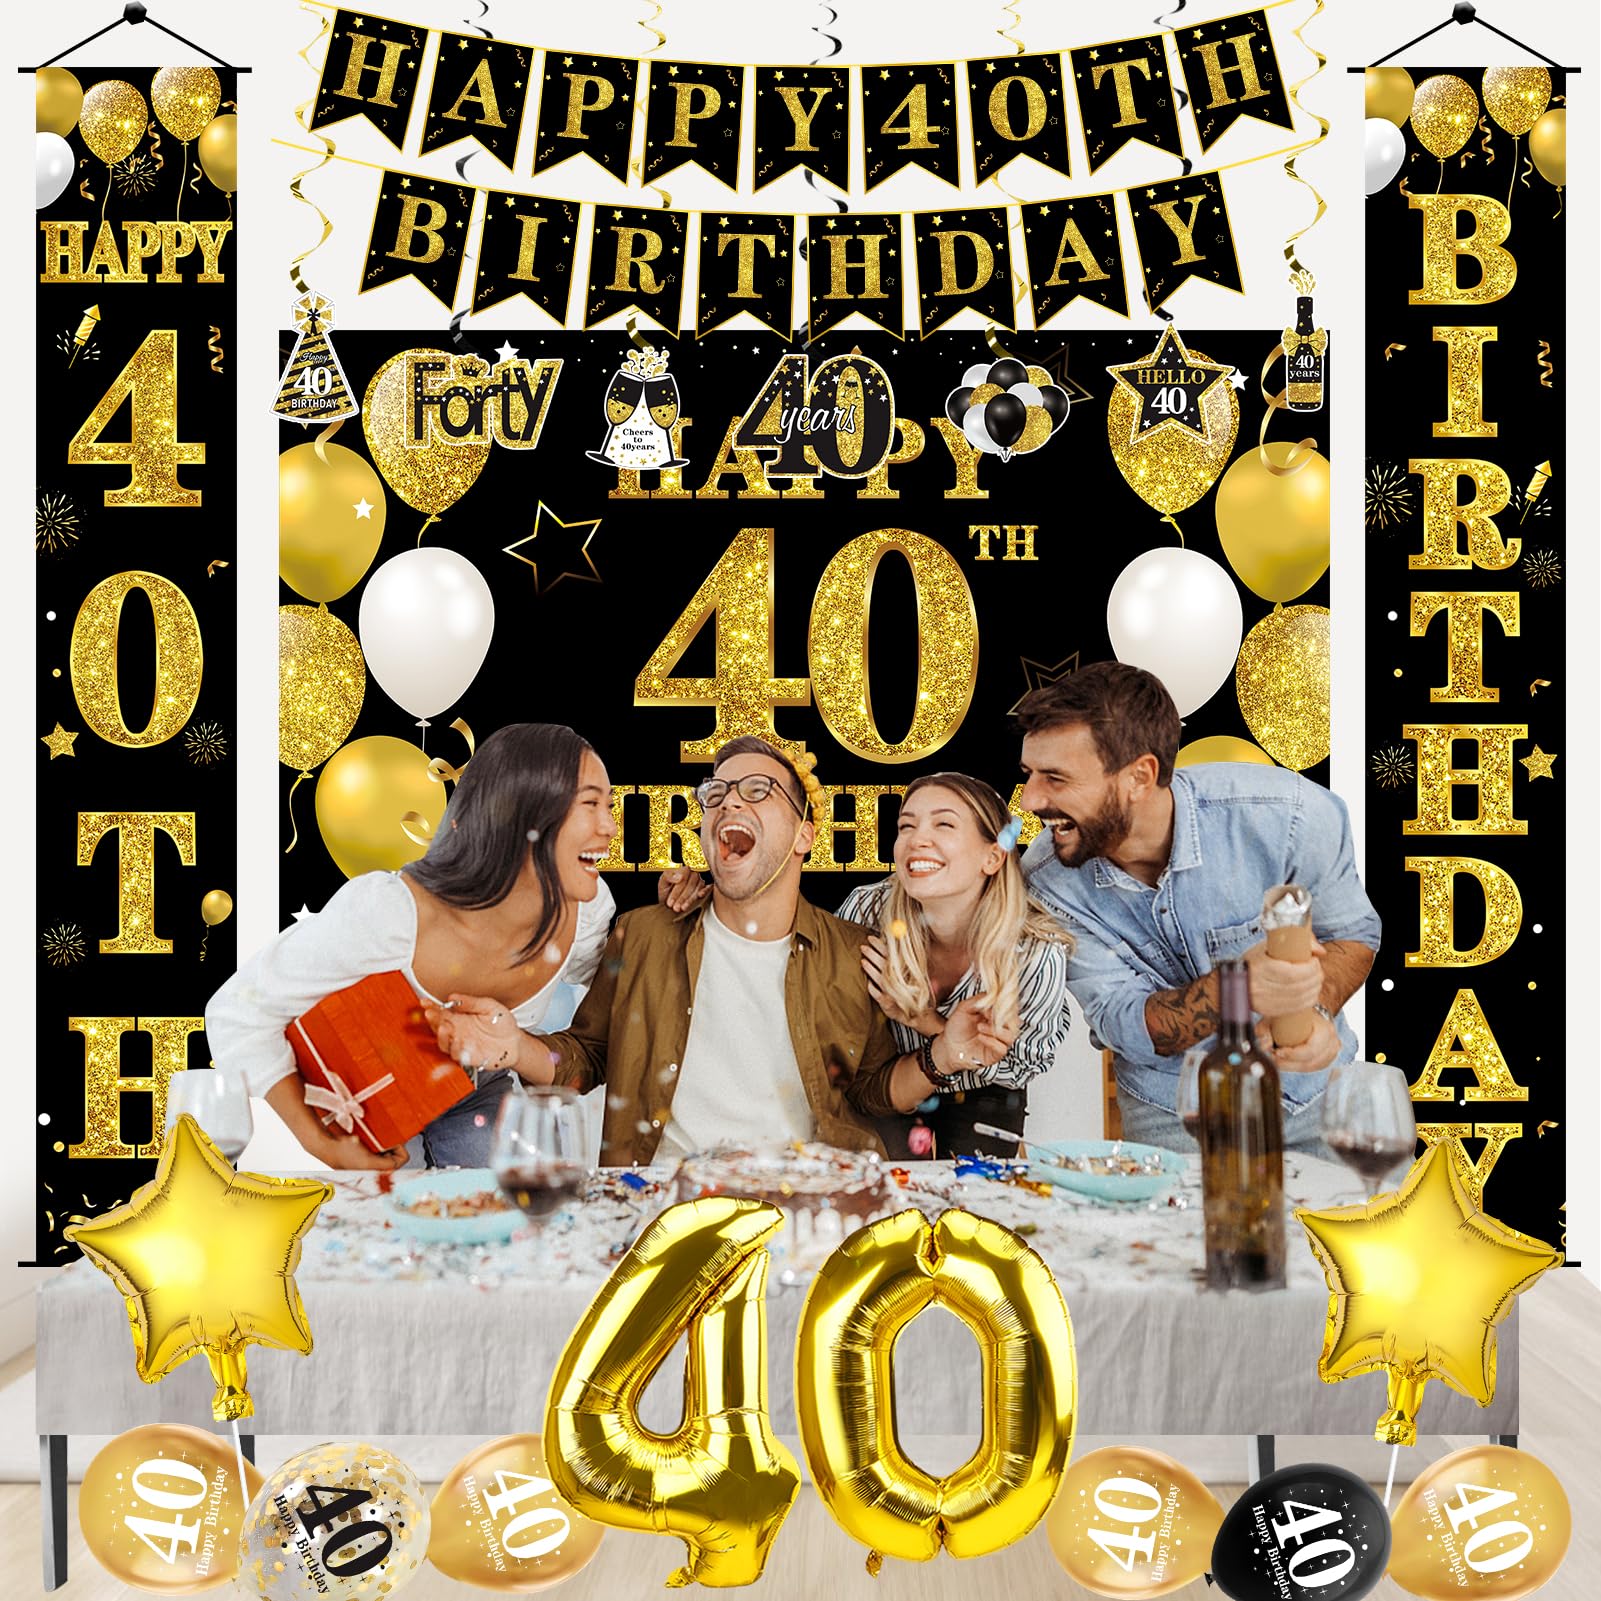 32Pcs 40th Birthday Decorations Kit for Men Women, Black Gold Happy 40 Birthday Banner Balloons Hanging Swirls Kit Party Supplies, Forty Year Old Birthday Backdrop Props Sign Decor